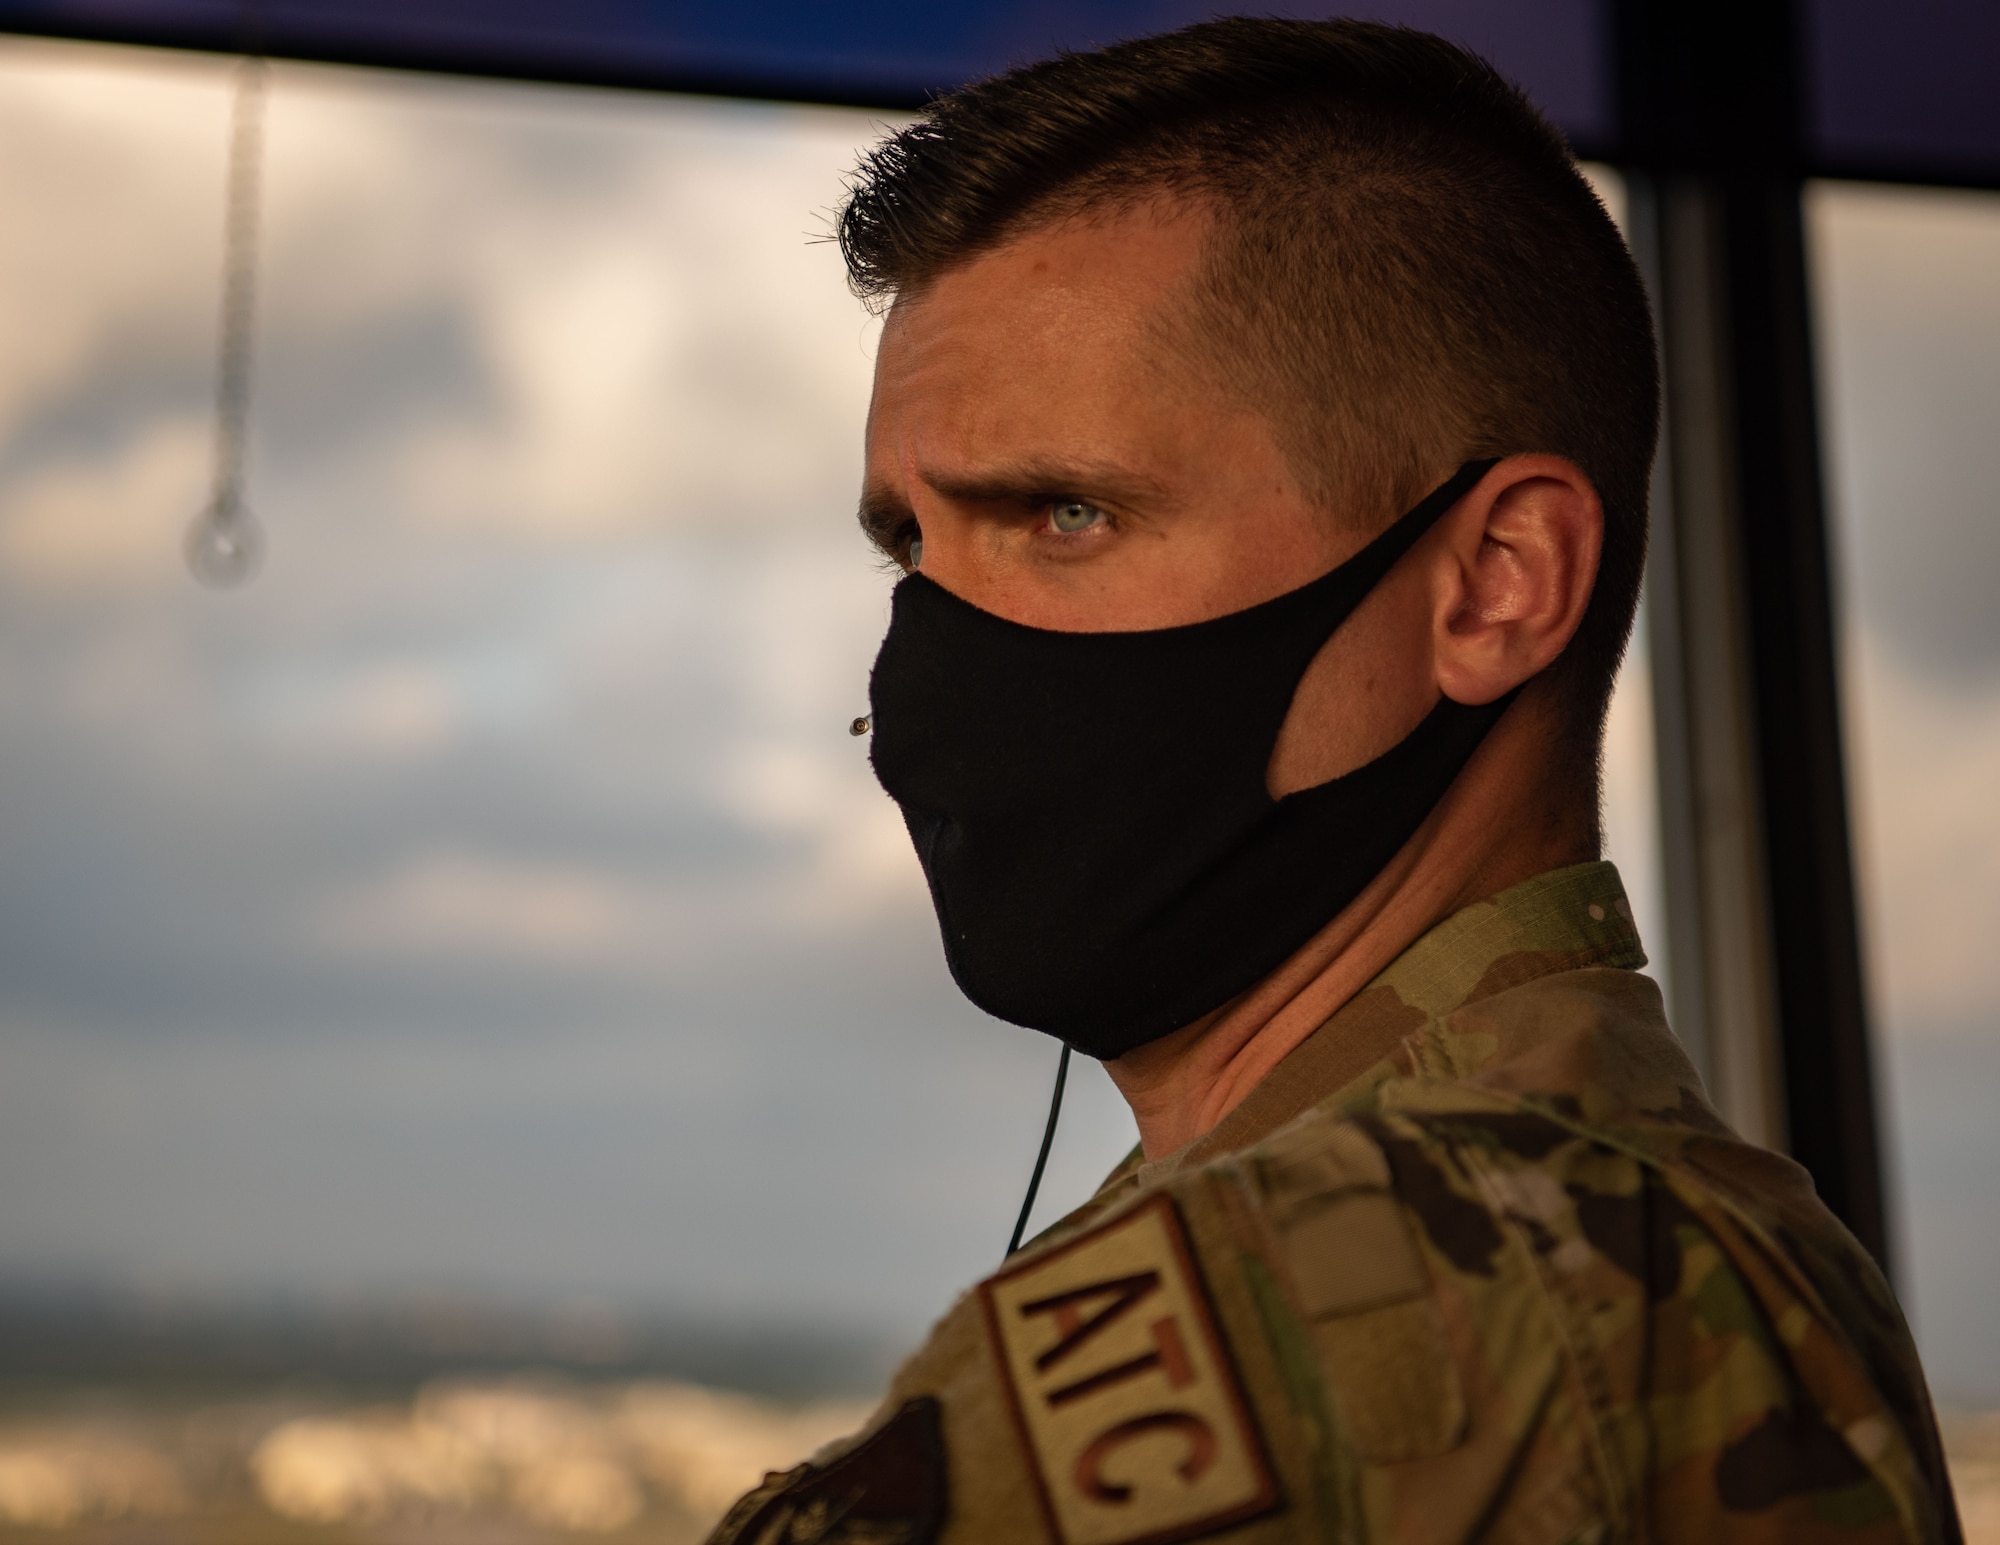 An Airman looks into the distance.